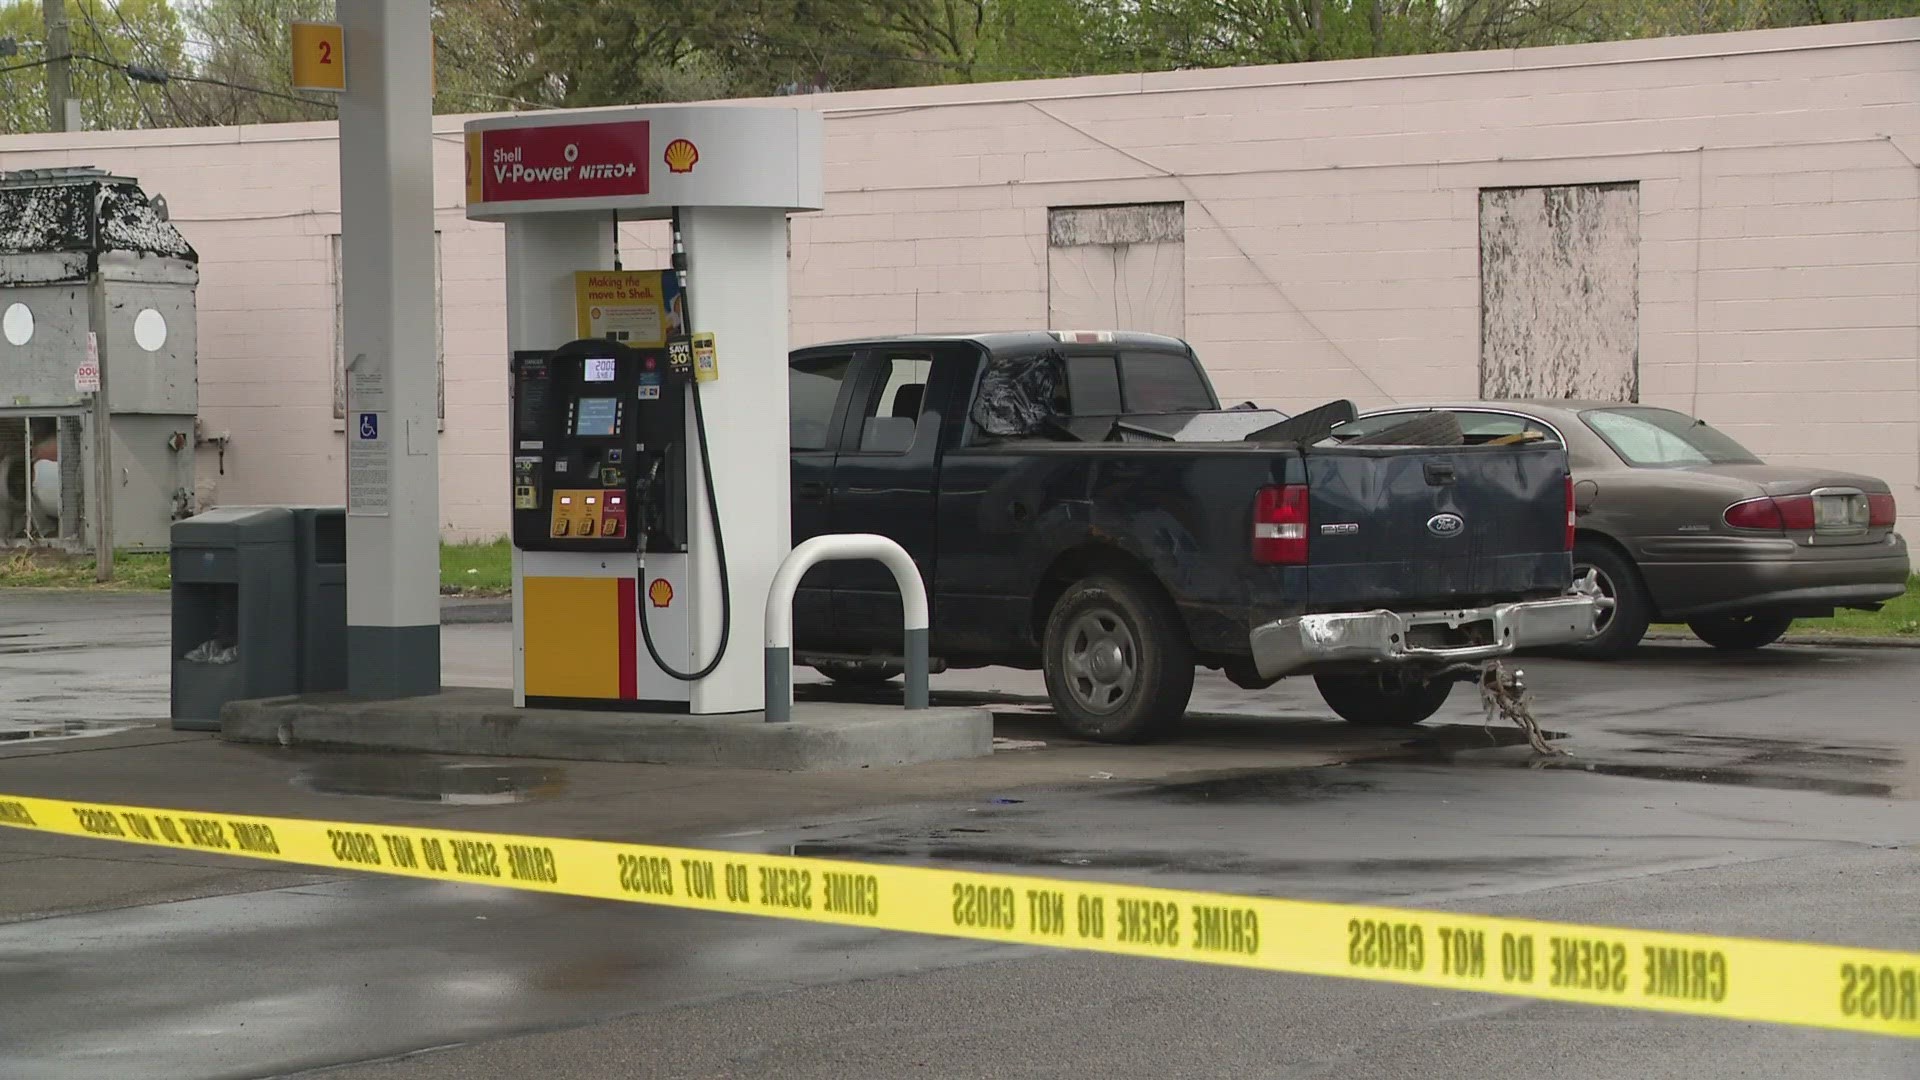 The victim was driven to a nearby gas station at 34th and Emerson where people called 9-1-1